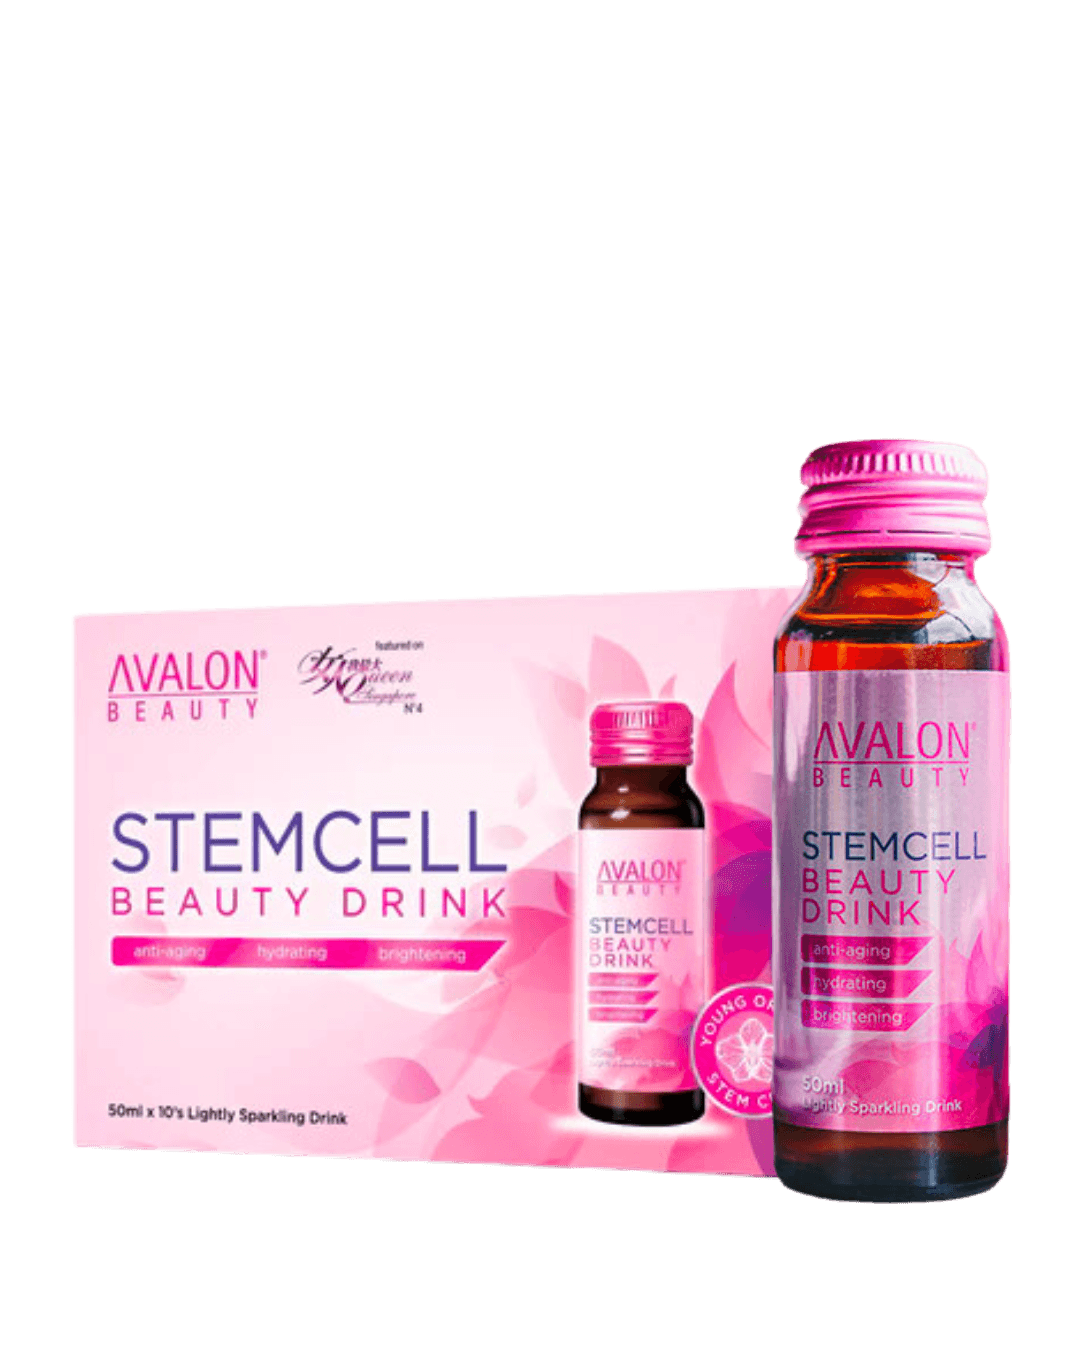 Daily Vanity Beauty Awards 2024 Best Skincare AVALON® Stemcell Beauty Drink Voted By Beauty Experts